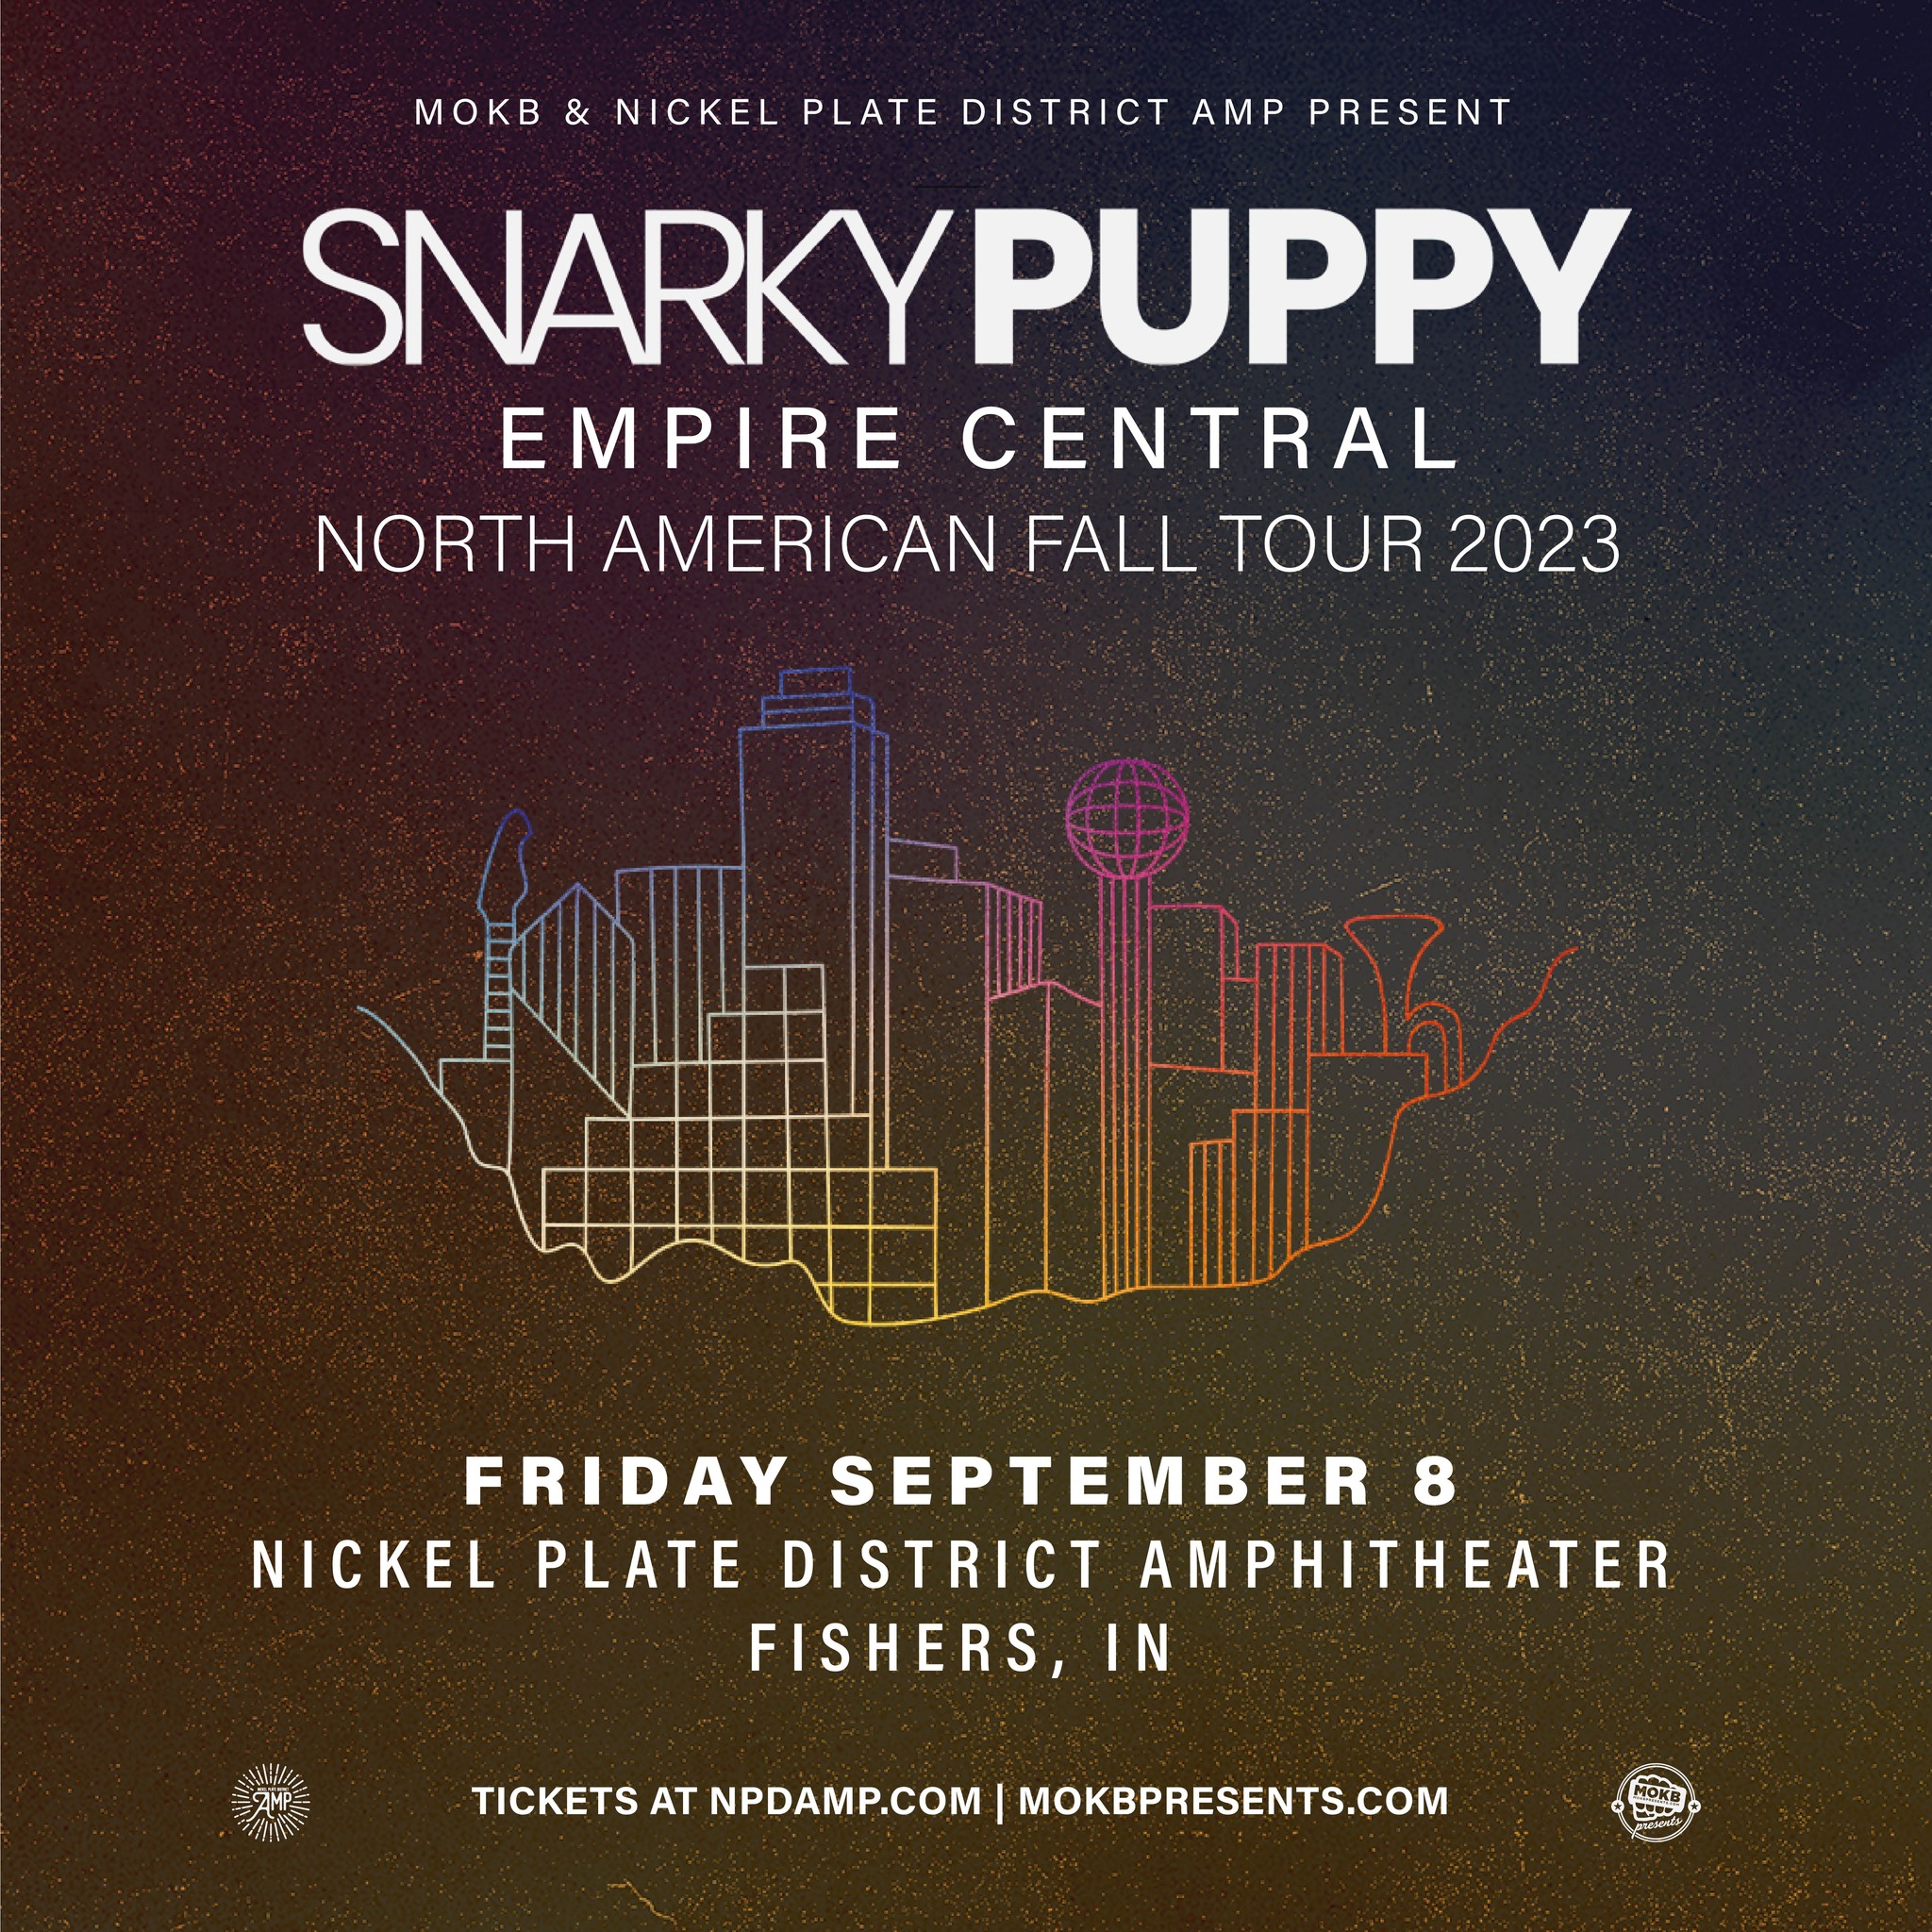 MOKB & Nickel Plate District Amp Present Snarky Puppy Empire Central North American Fall Tour 2023 Friday September 8 Nickel Plate District Amphitheater Fishers, IN Tickets at npdamp.com mokbpresents.com